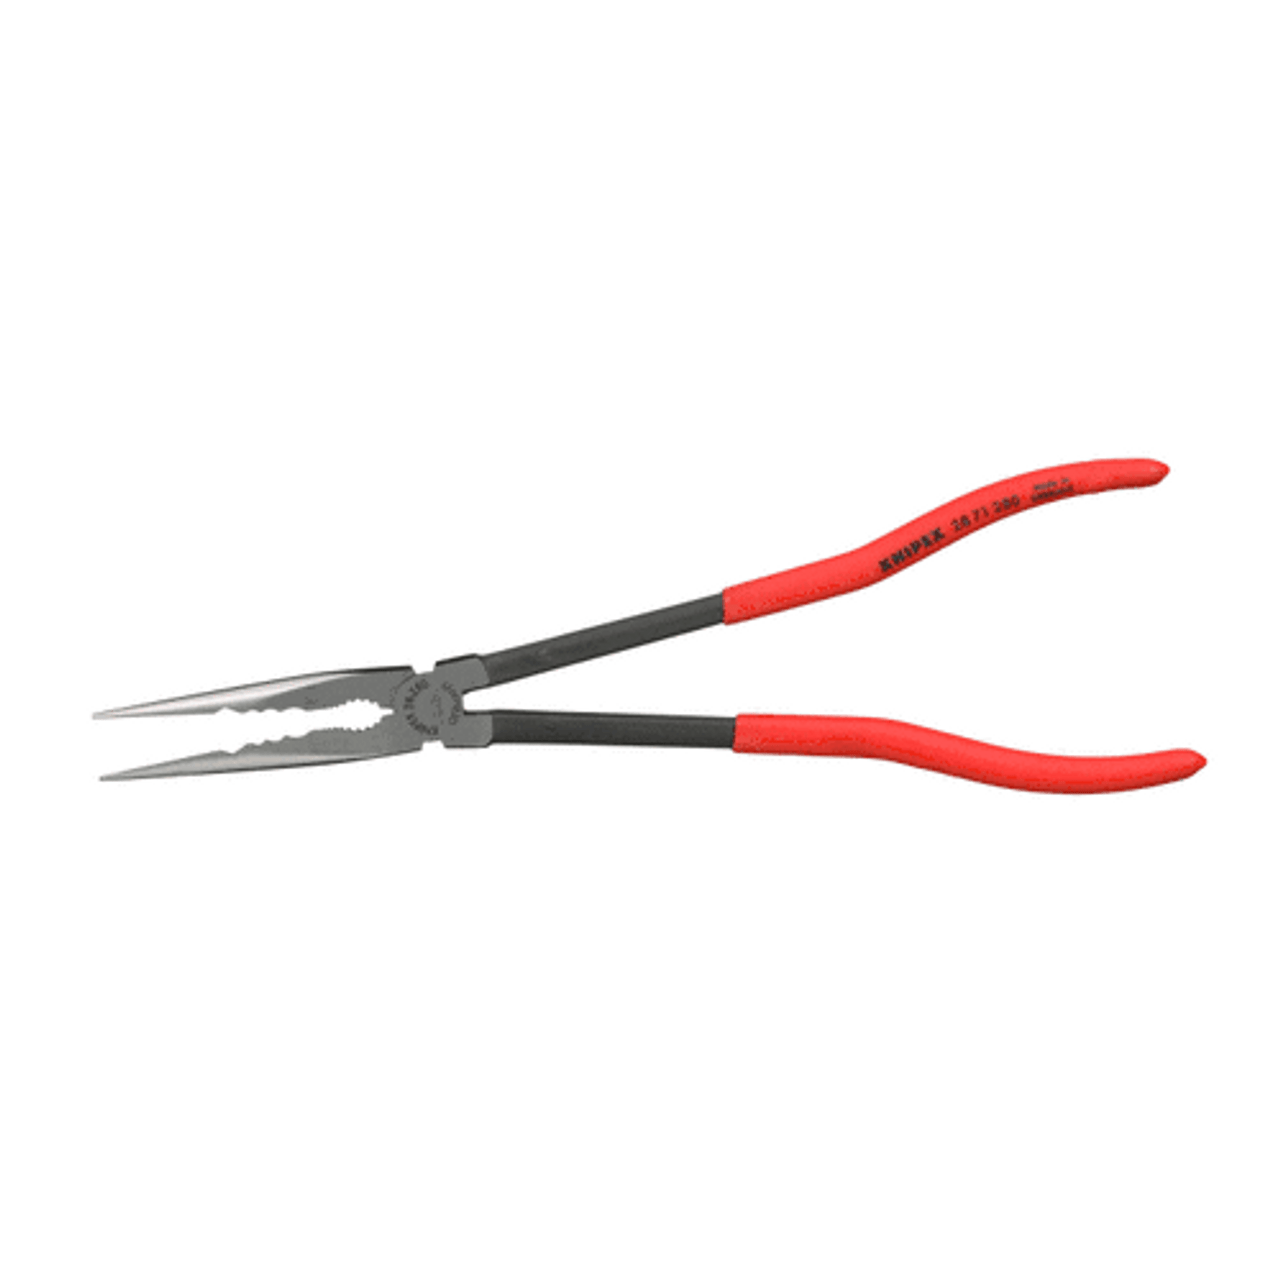 Knipex 28 81 280 11 Extra Long Needle Nose Pliers - Angled